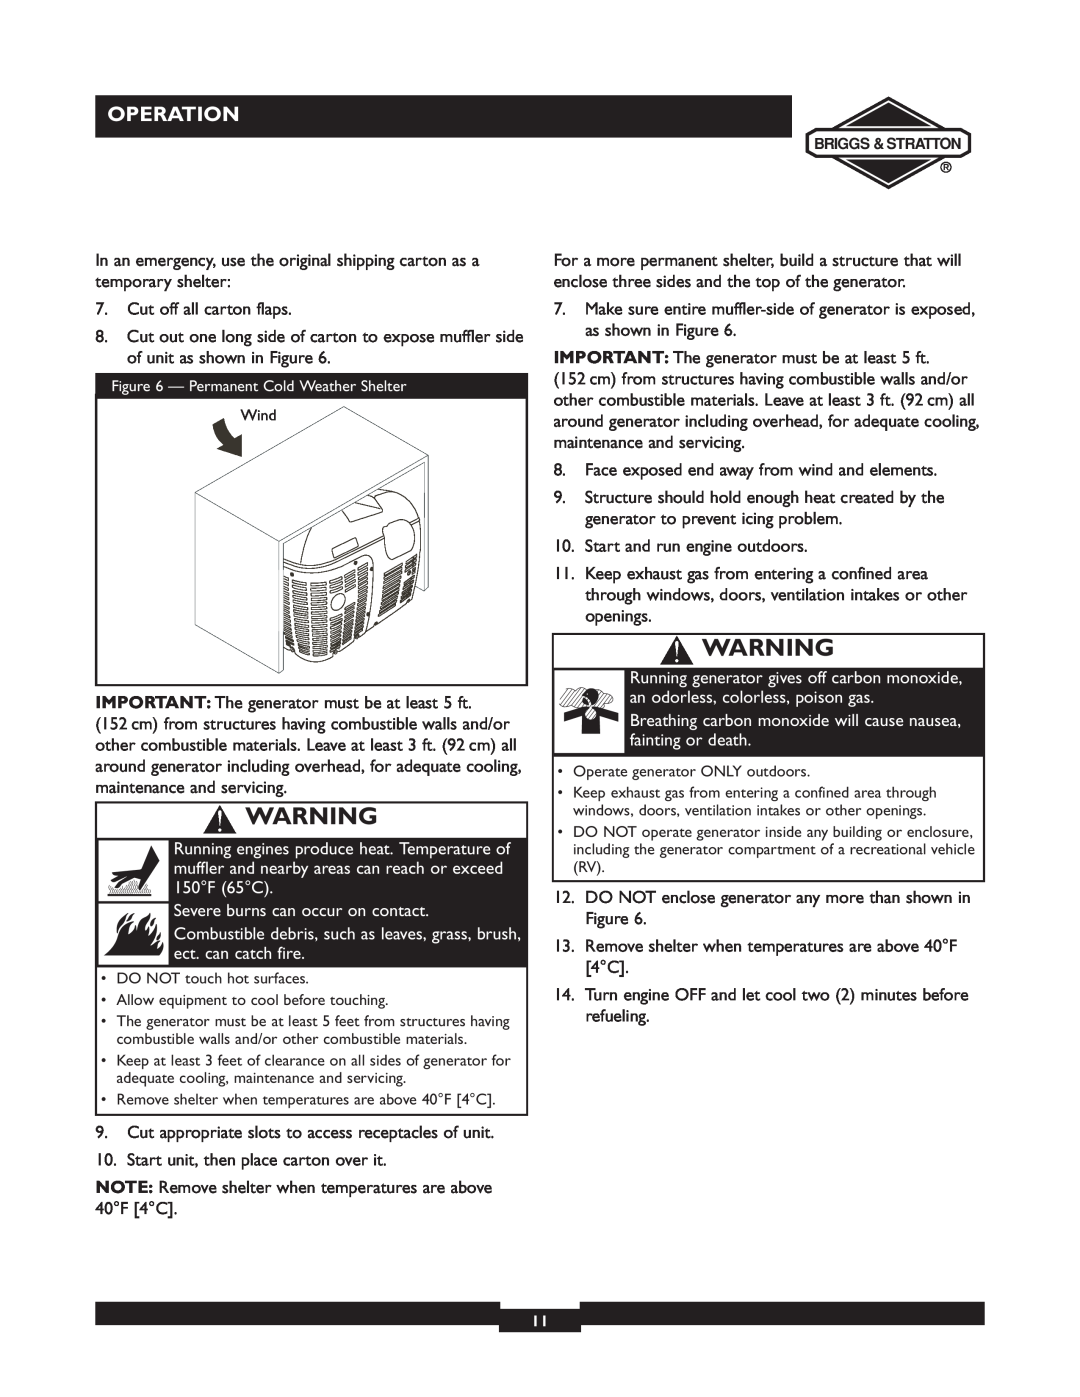 Briggs & Stratton 01532-4 owner manual Operation, Severe burns can occur on contact 